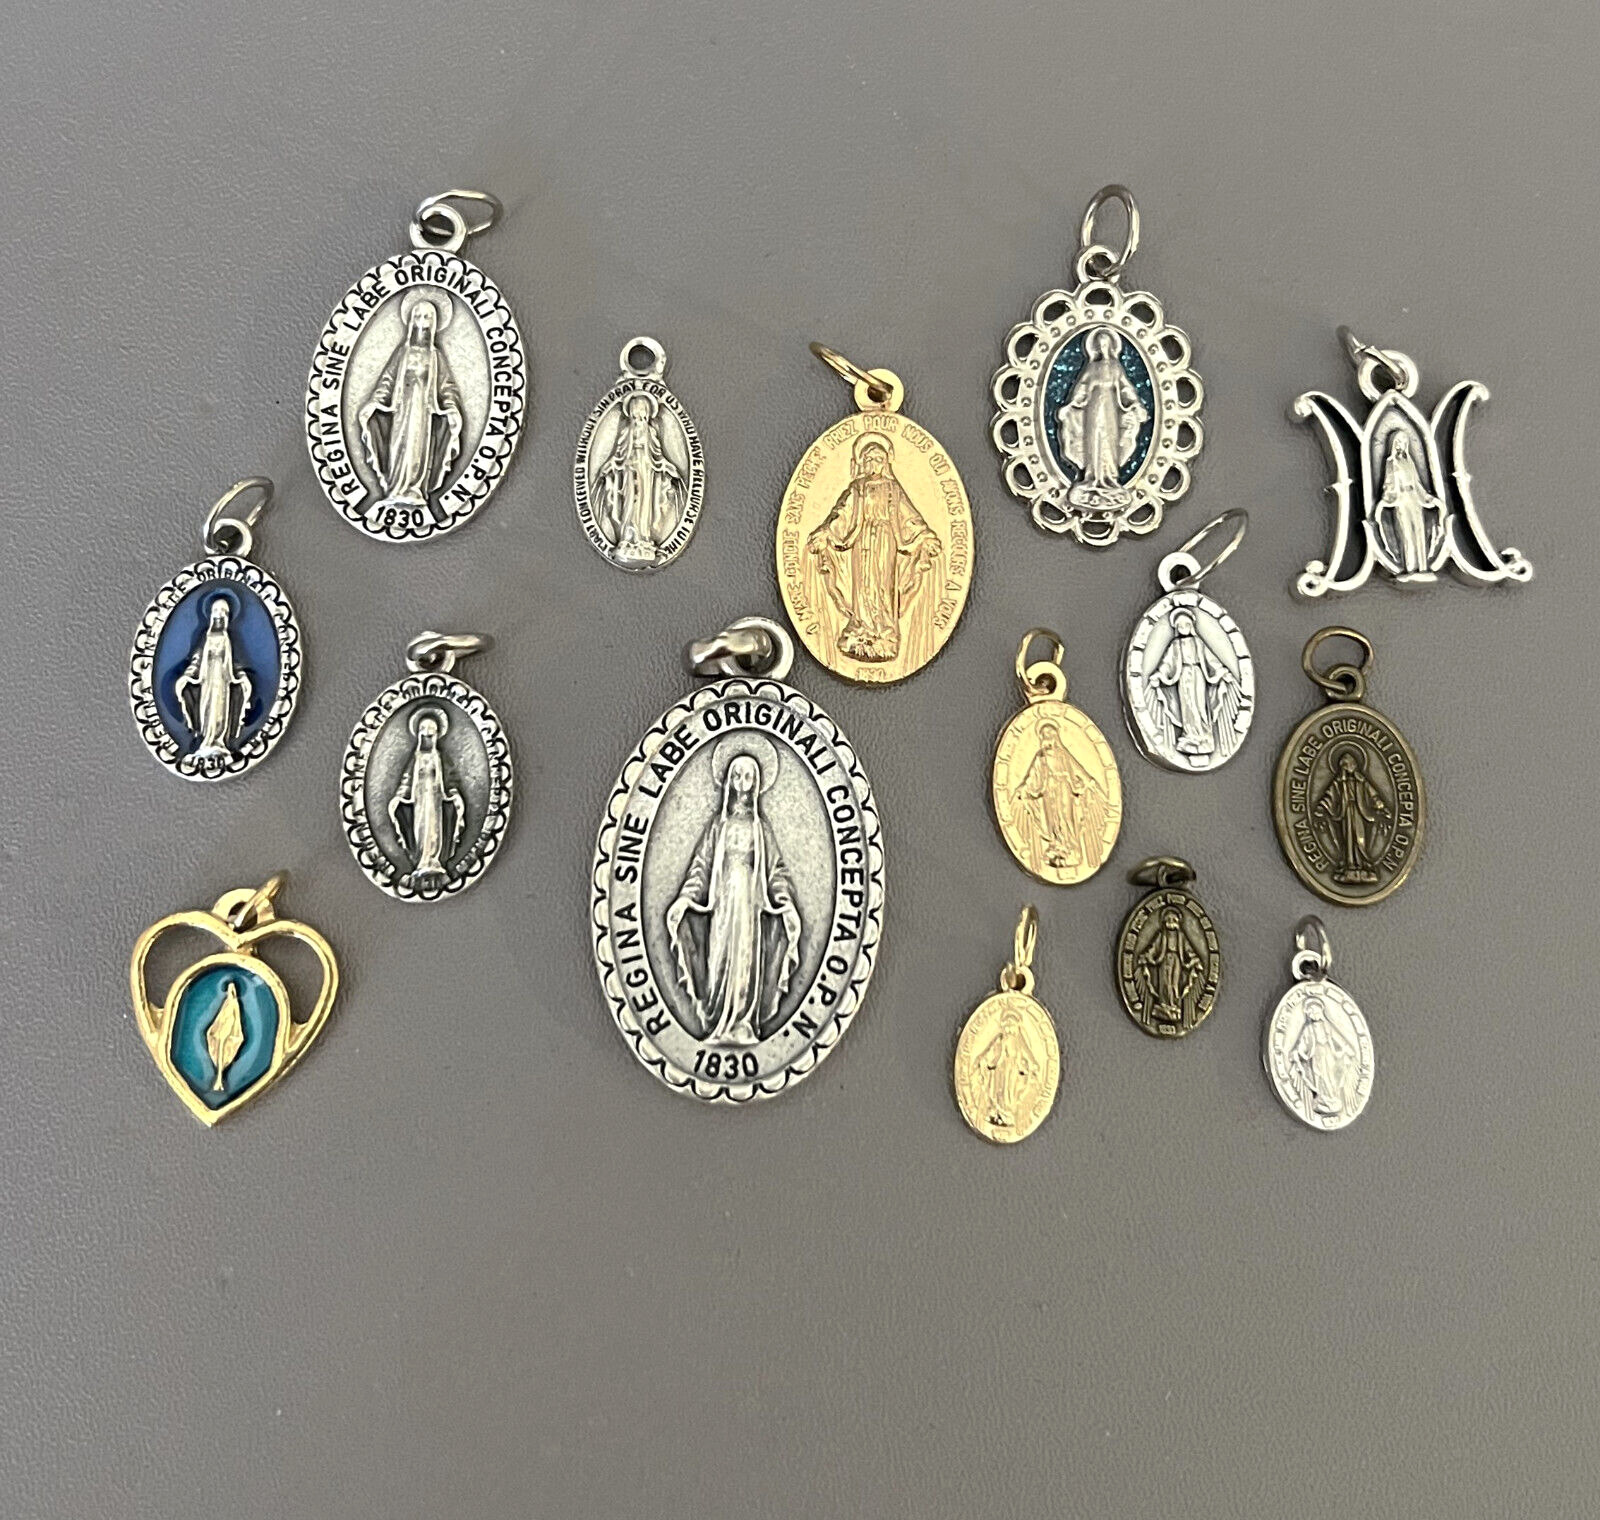 Lot 15 Miraculous Medal Holy Virgin Mary Catholic Charm ITALY Gold Silver Bronze